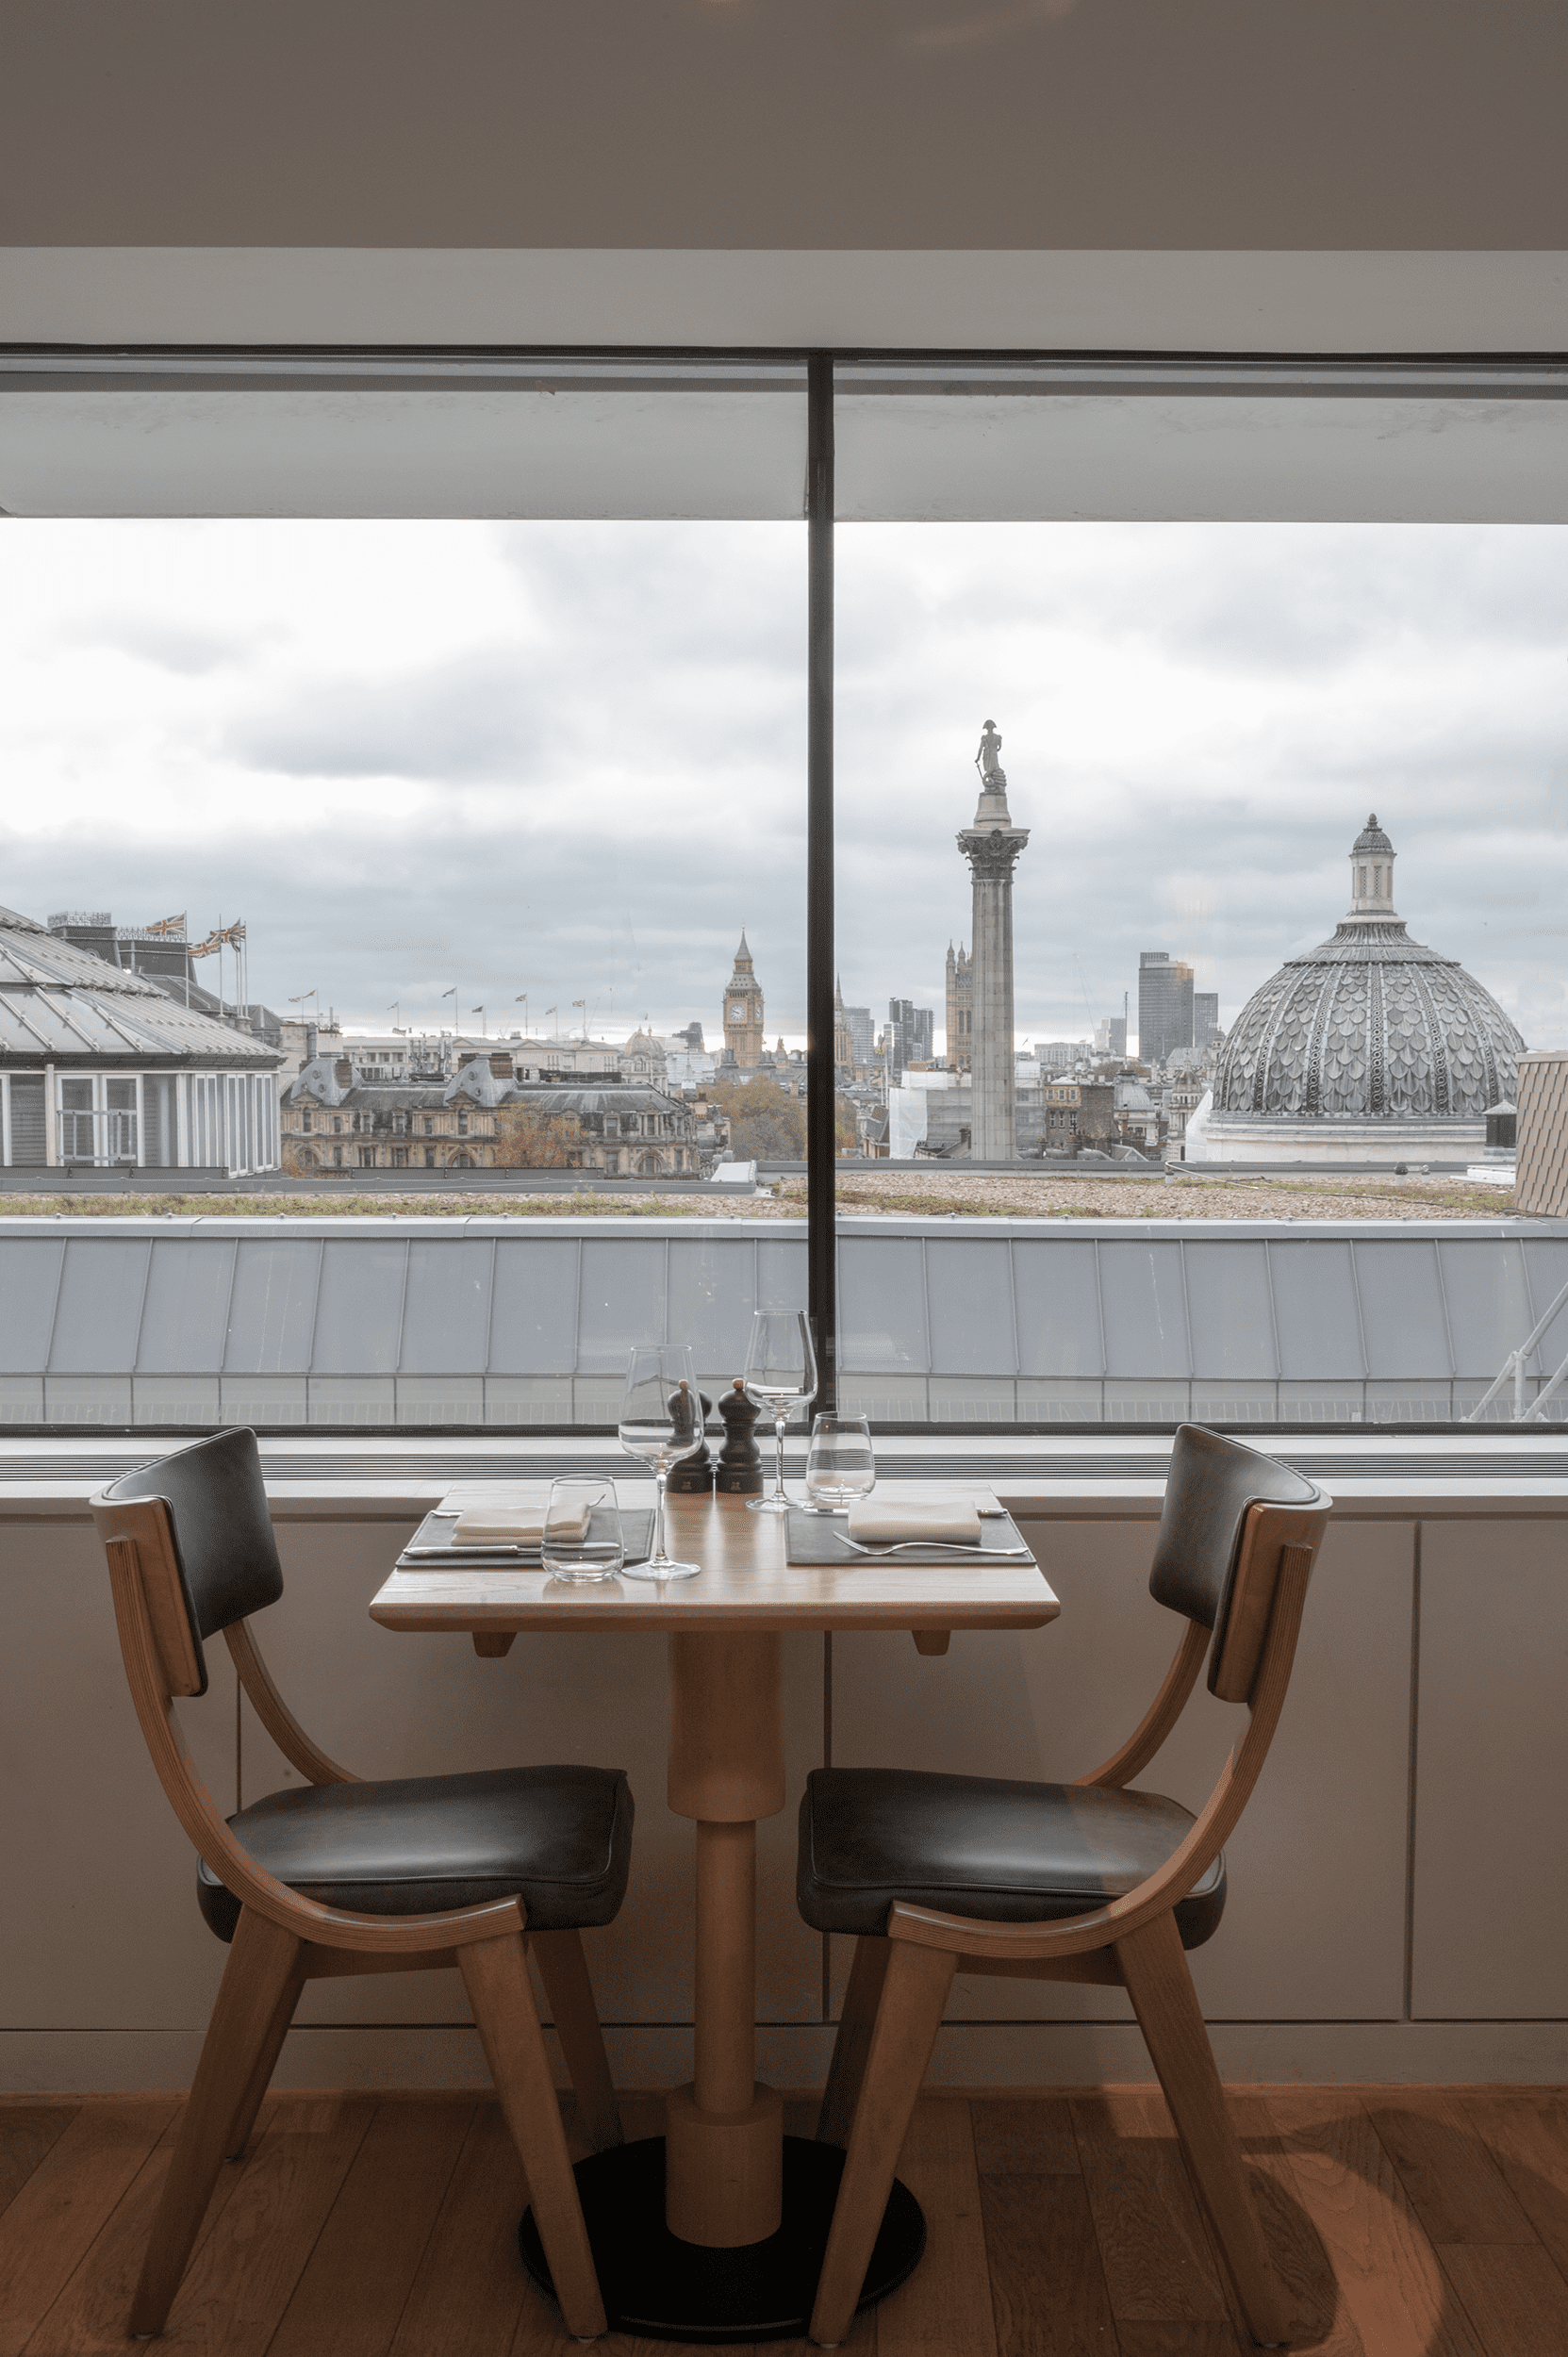 Dining view of London skyline at The Portrait restaurant, London